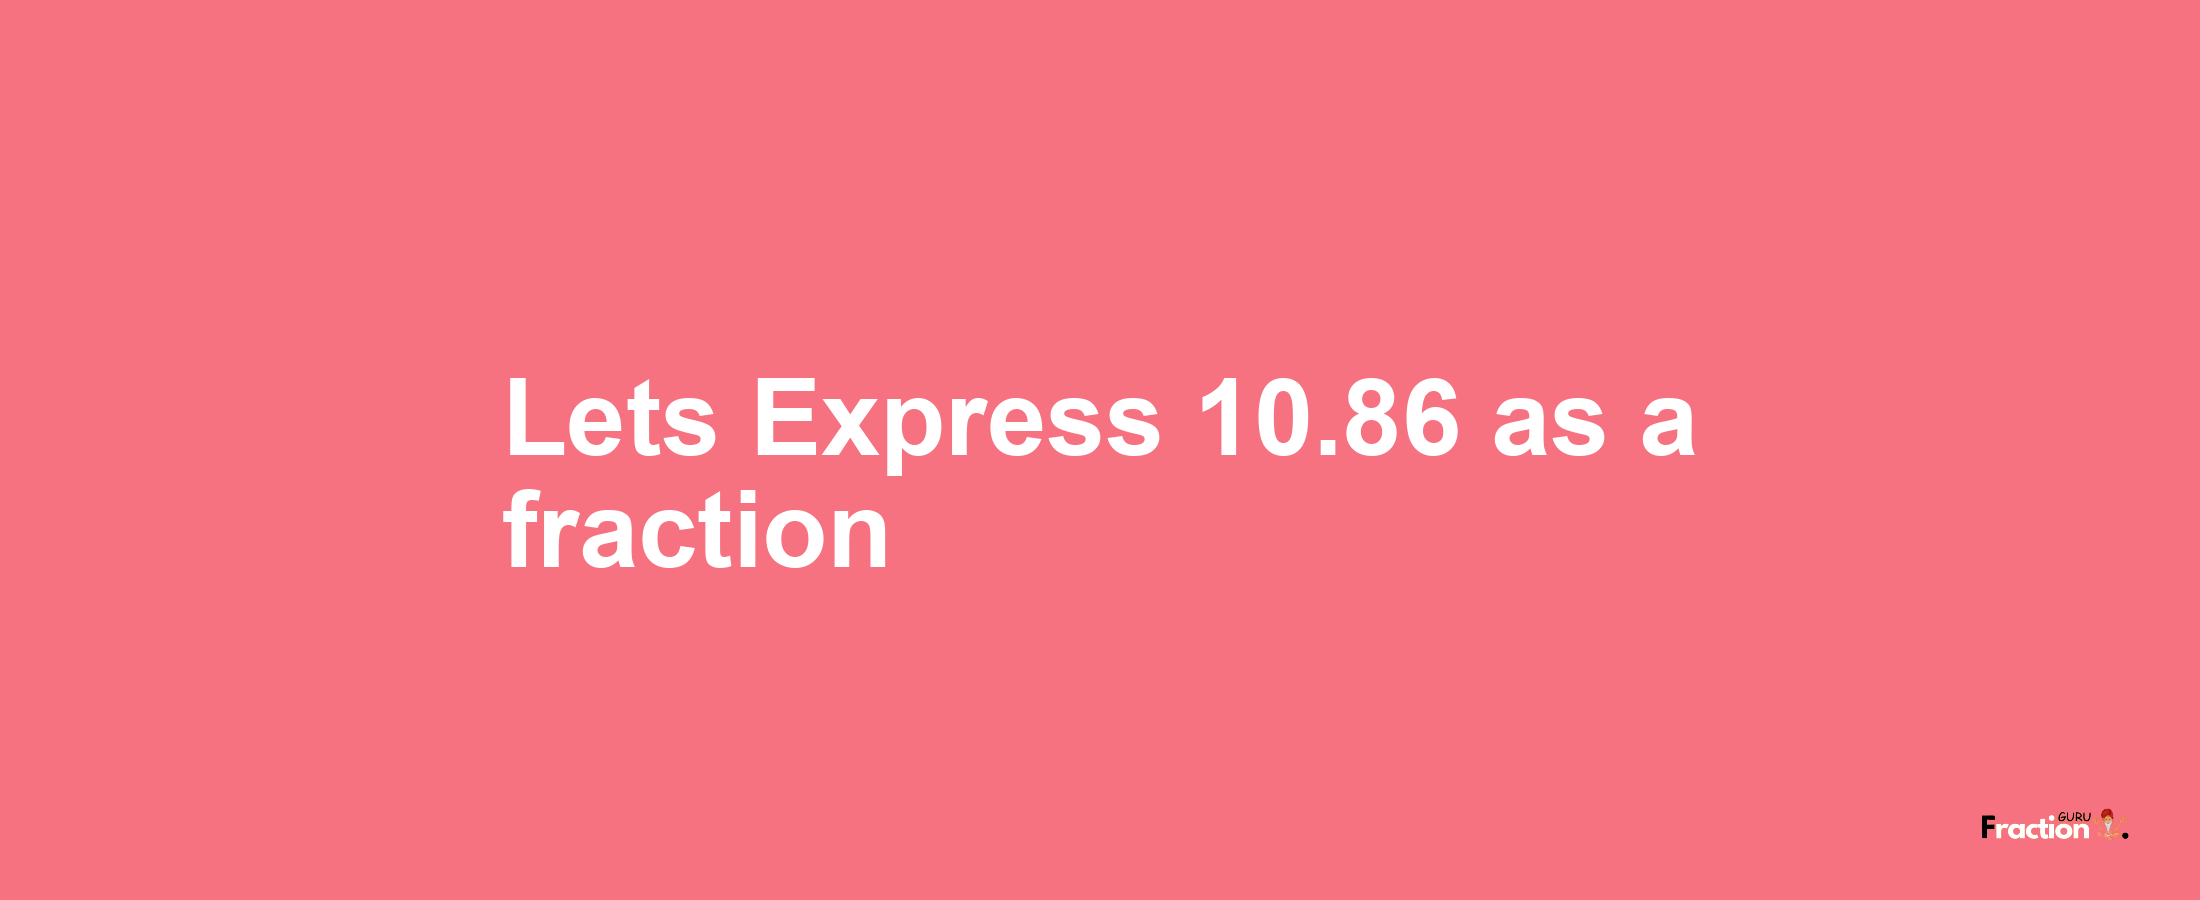 Lets Express 10.86 as afraction